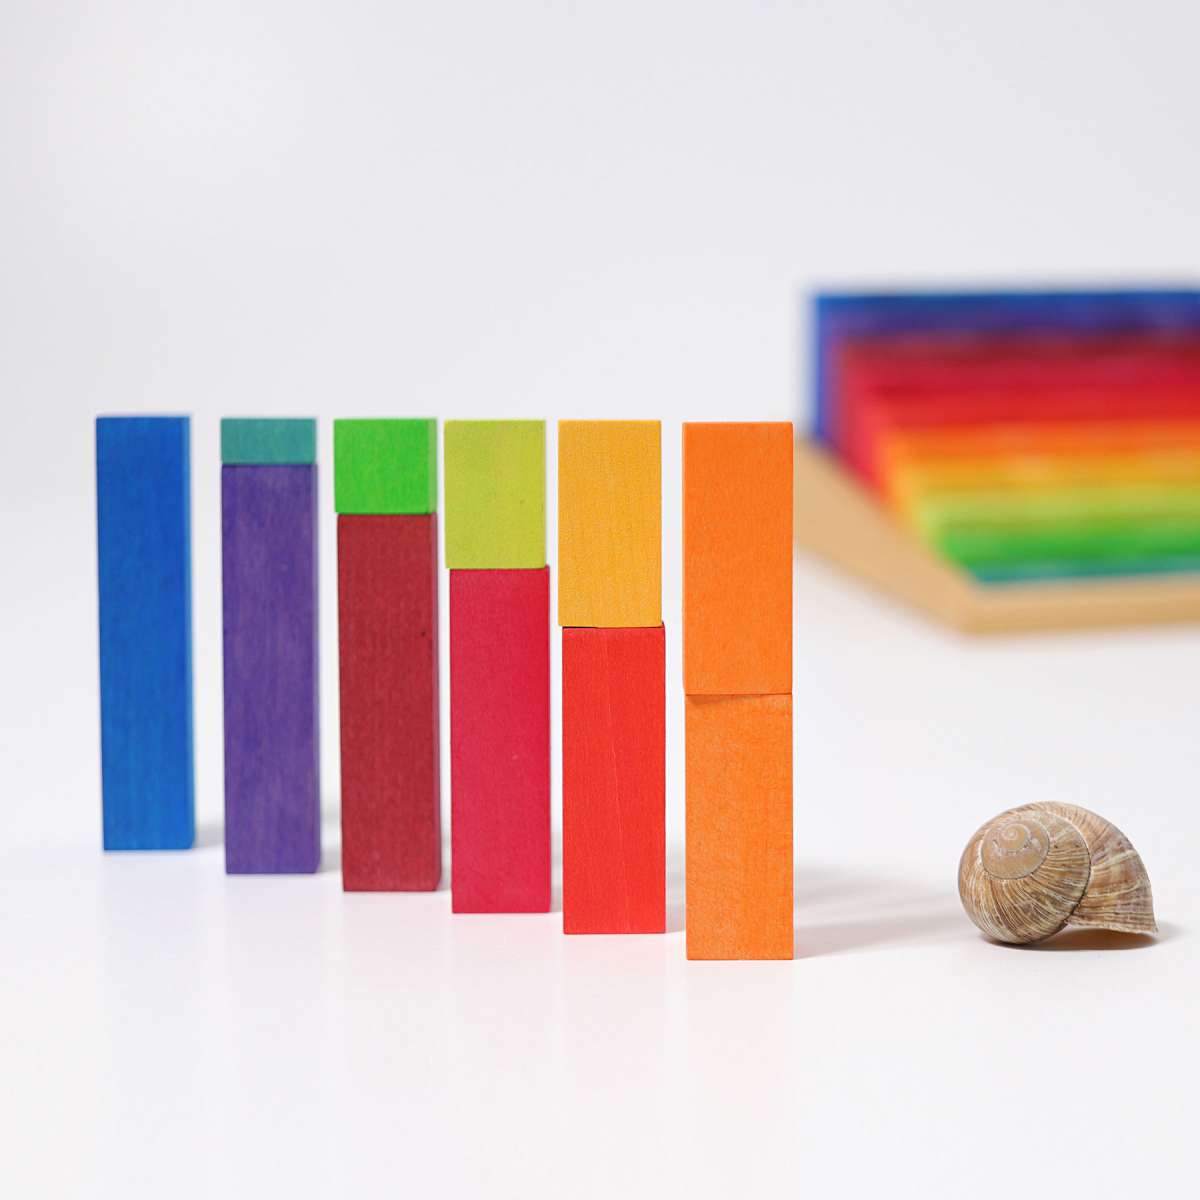 Small Stepped Counting Blocks with shell